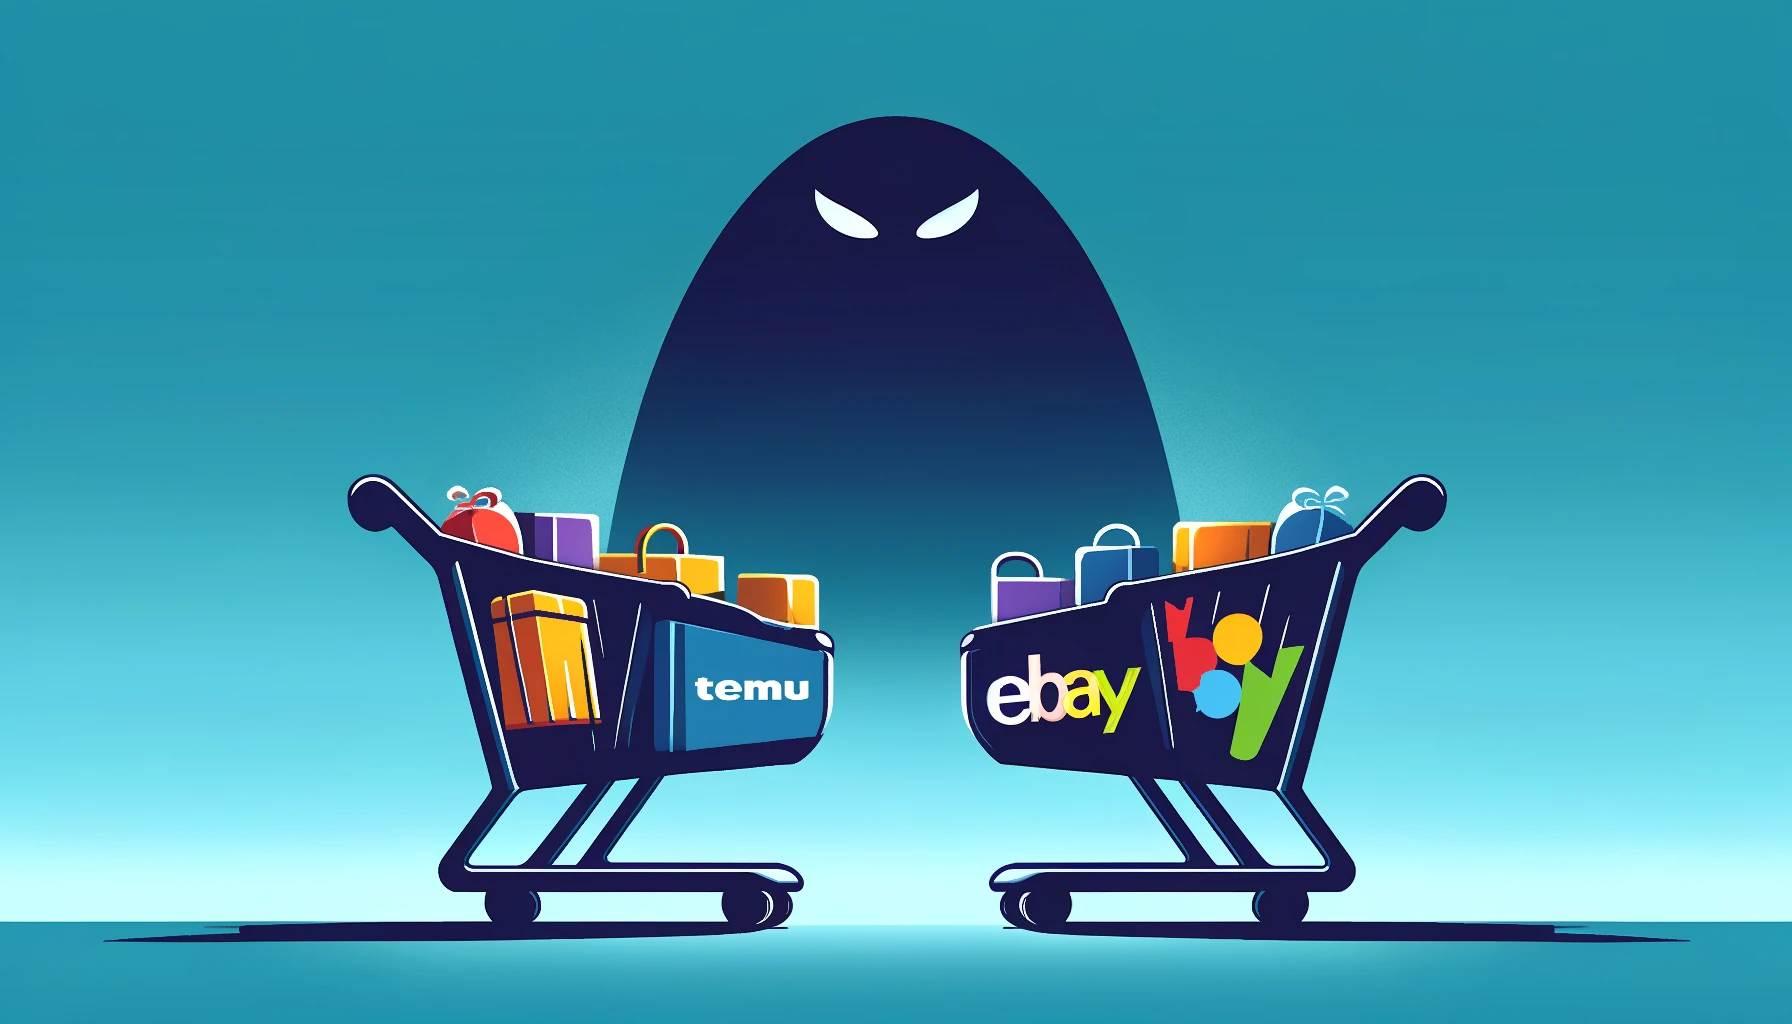 Temu Attracts More Repeat Buyers than eBay, Challenges Amazon